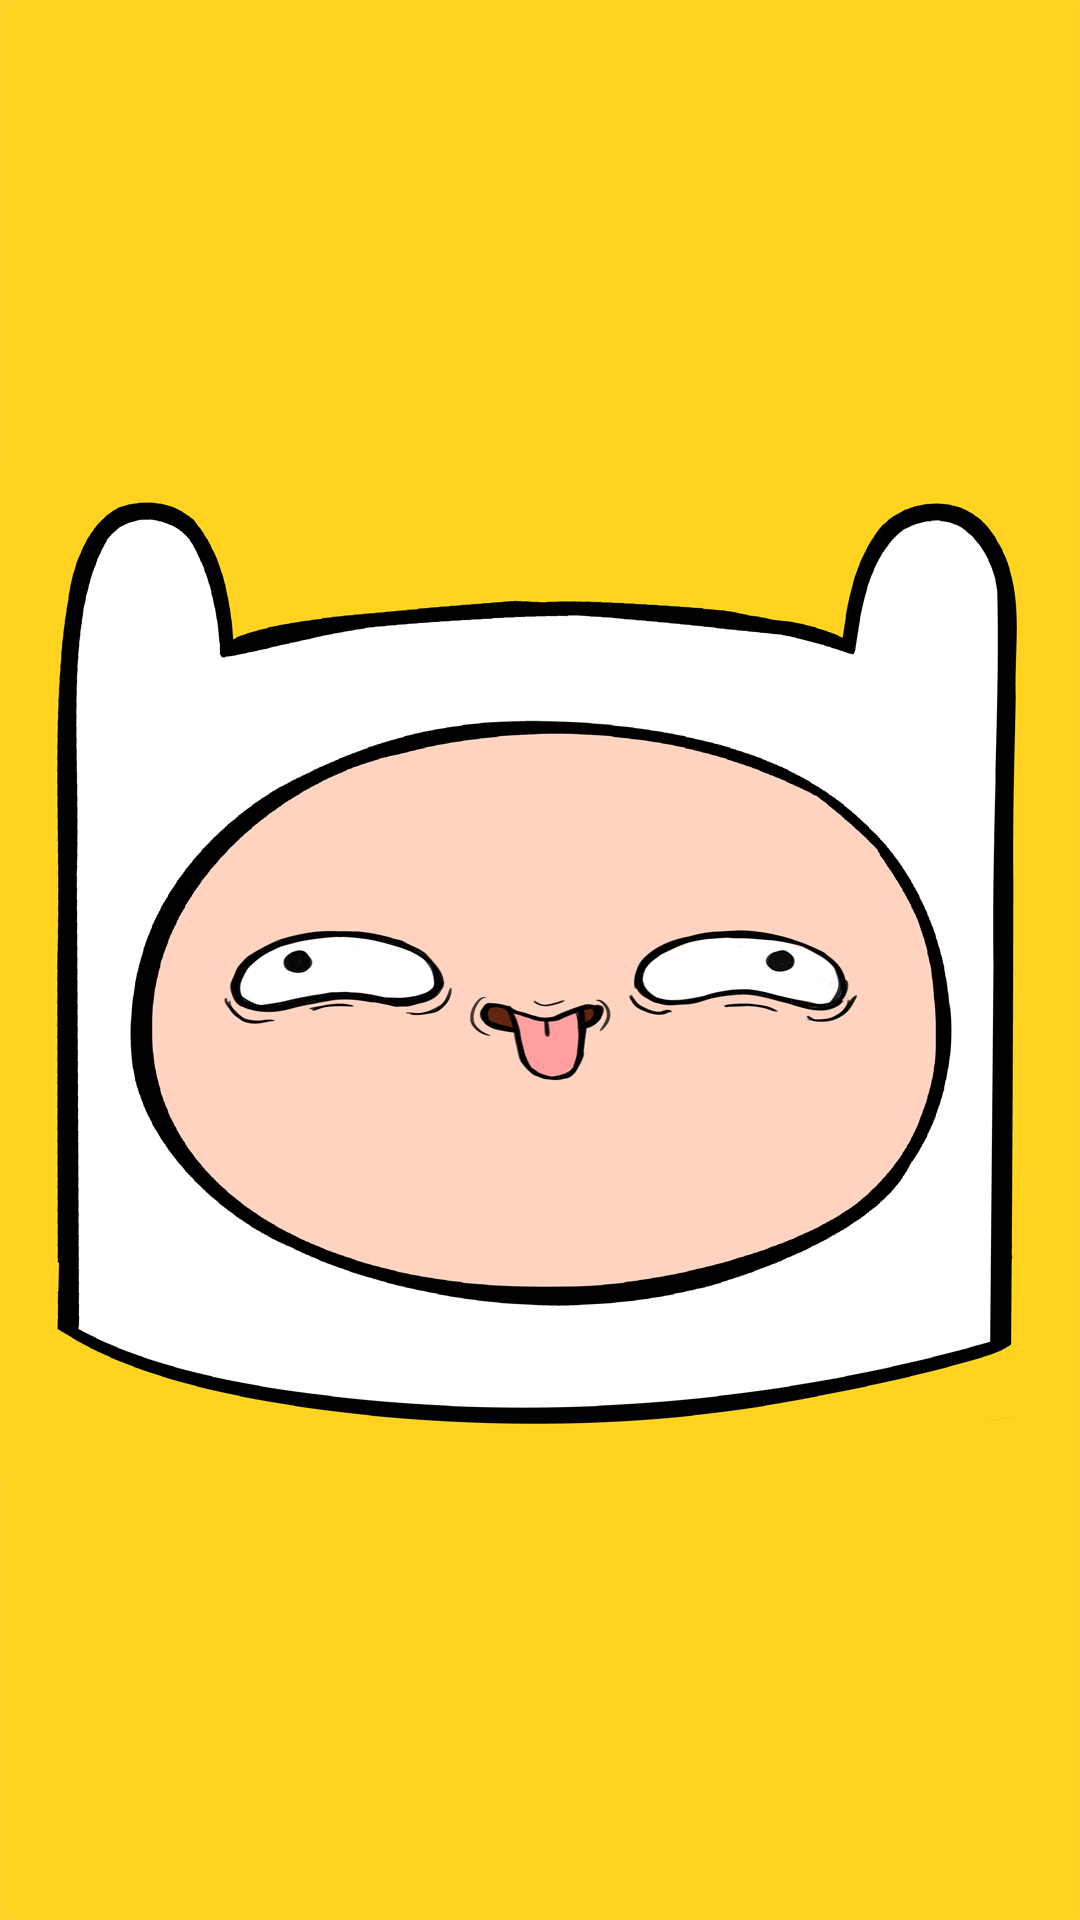 Adventure Time iPhone Background